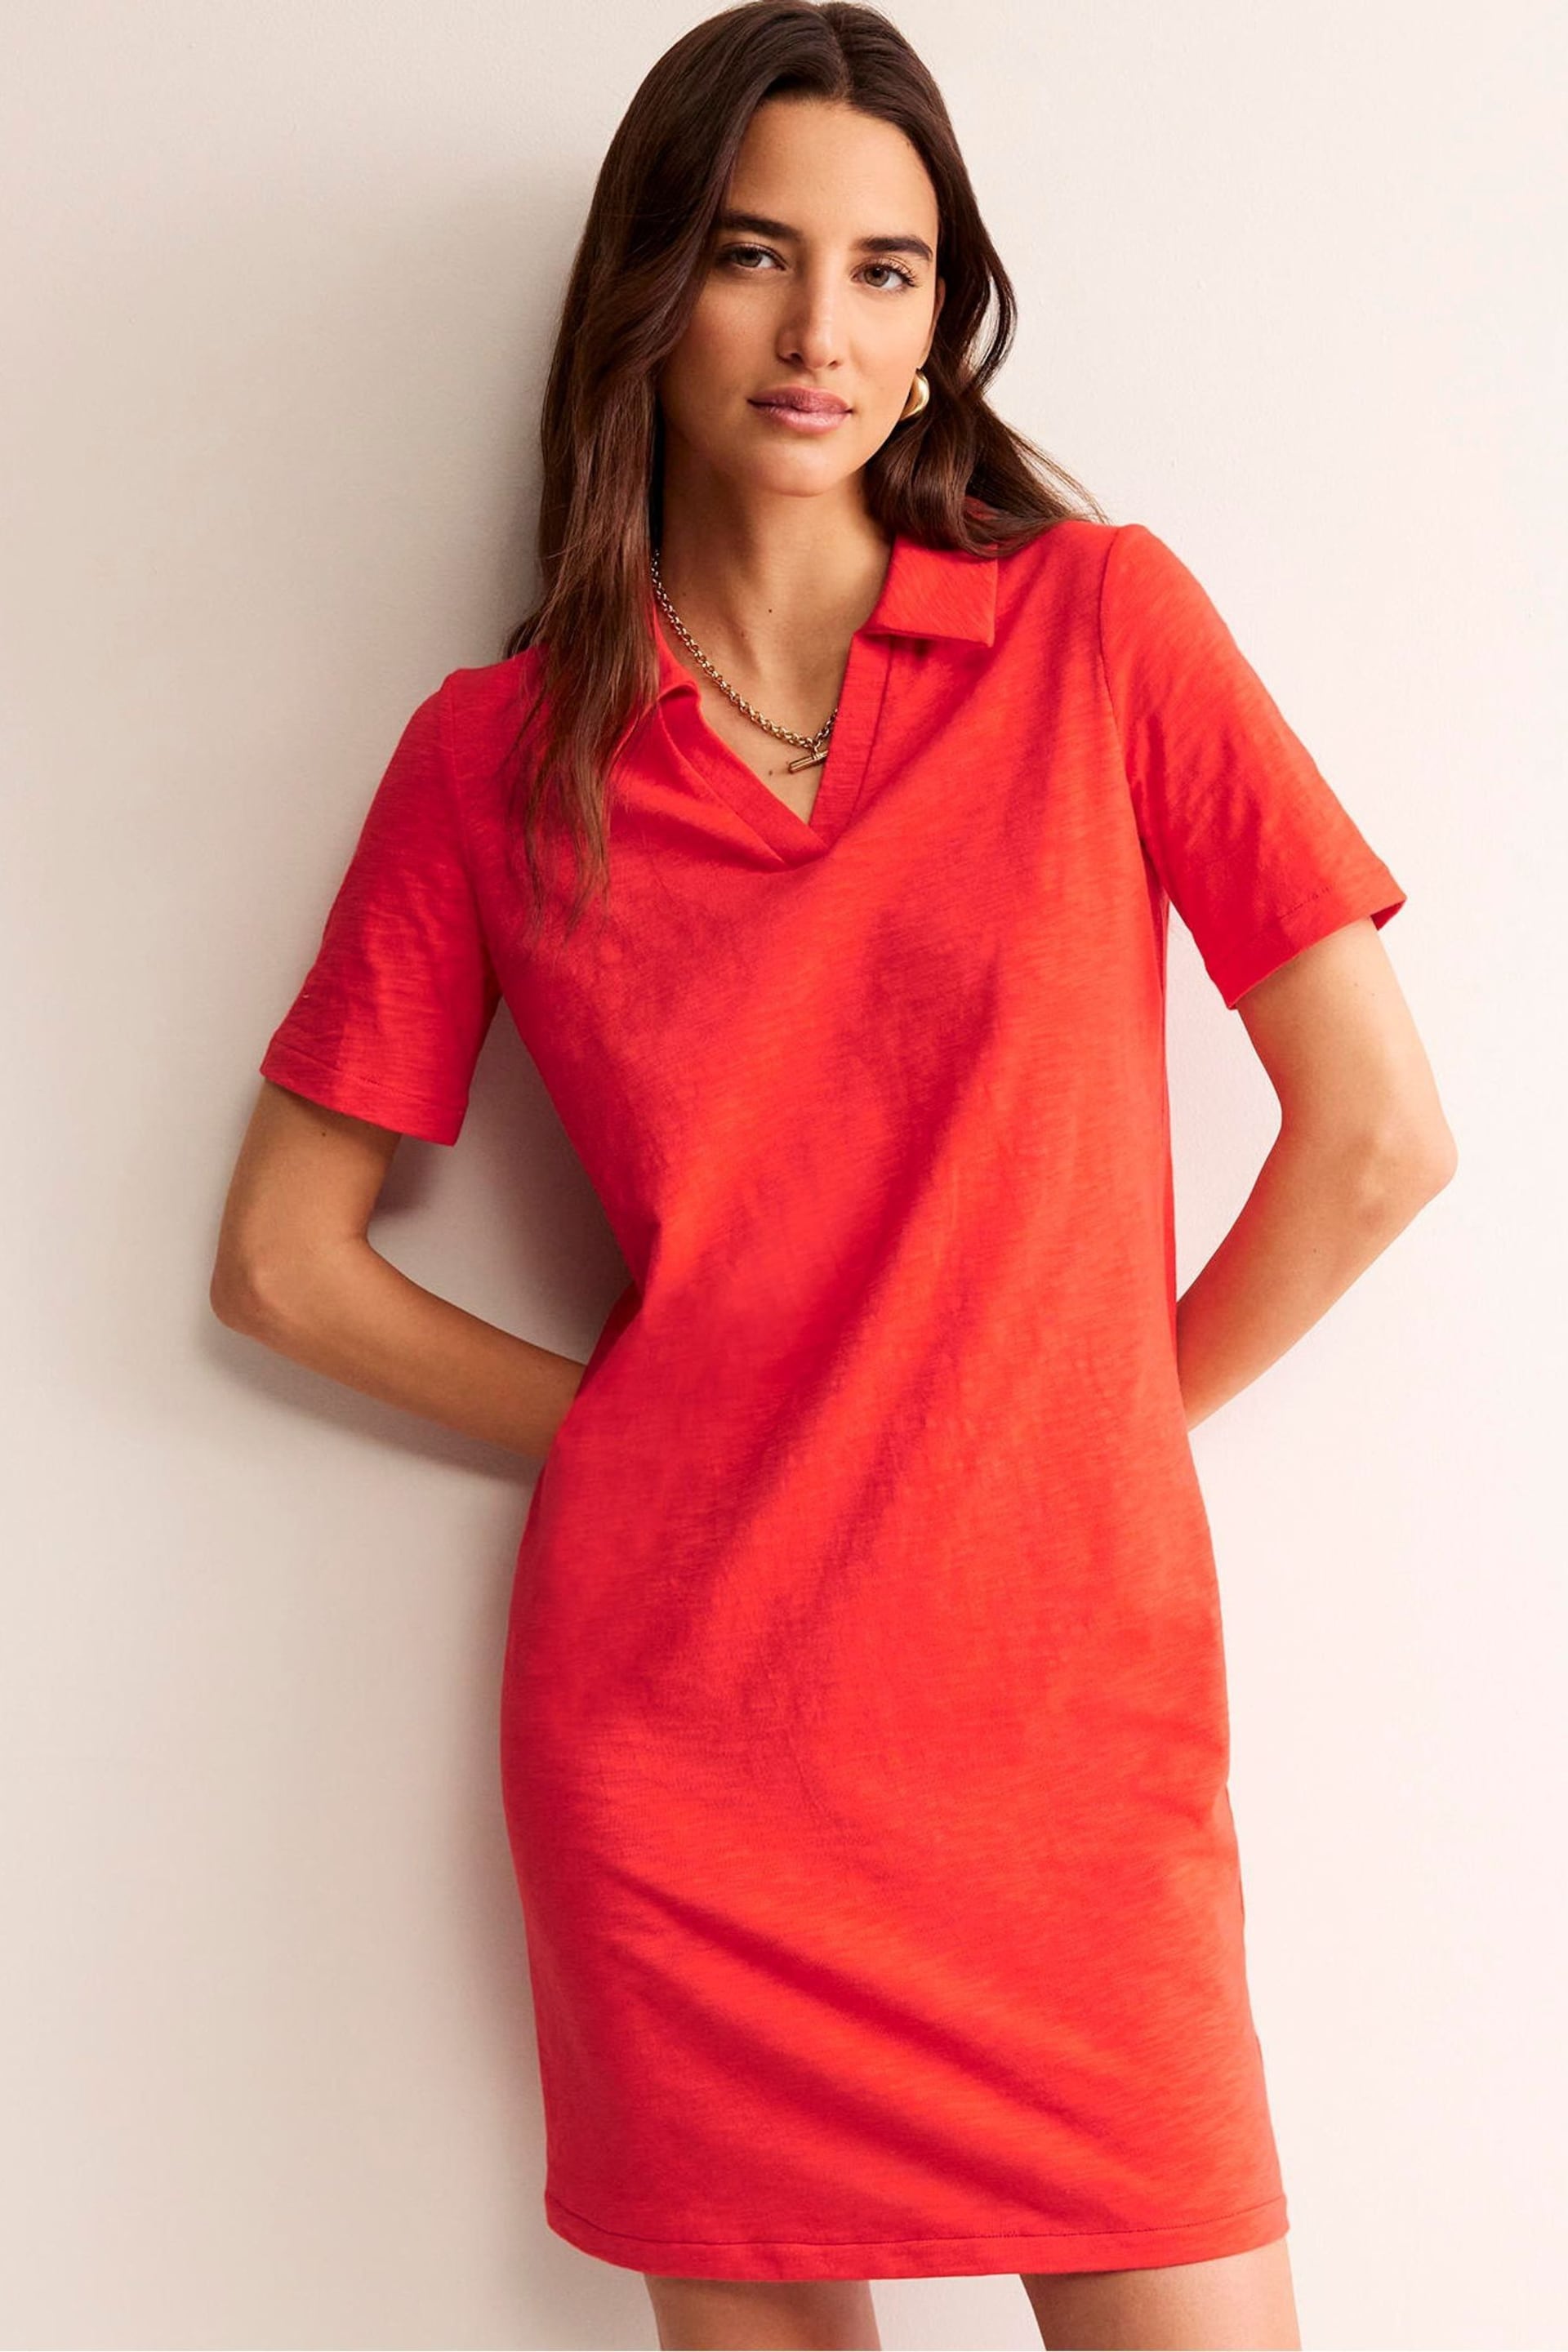 Boden Red Ingrid Polo Cotton Dress - Image 1 of 5